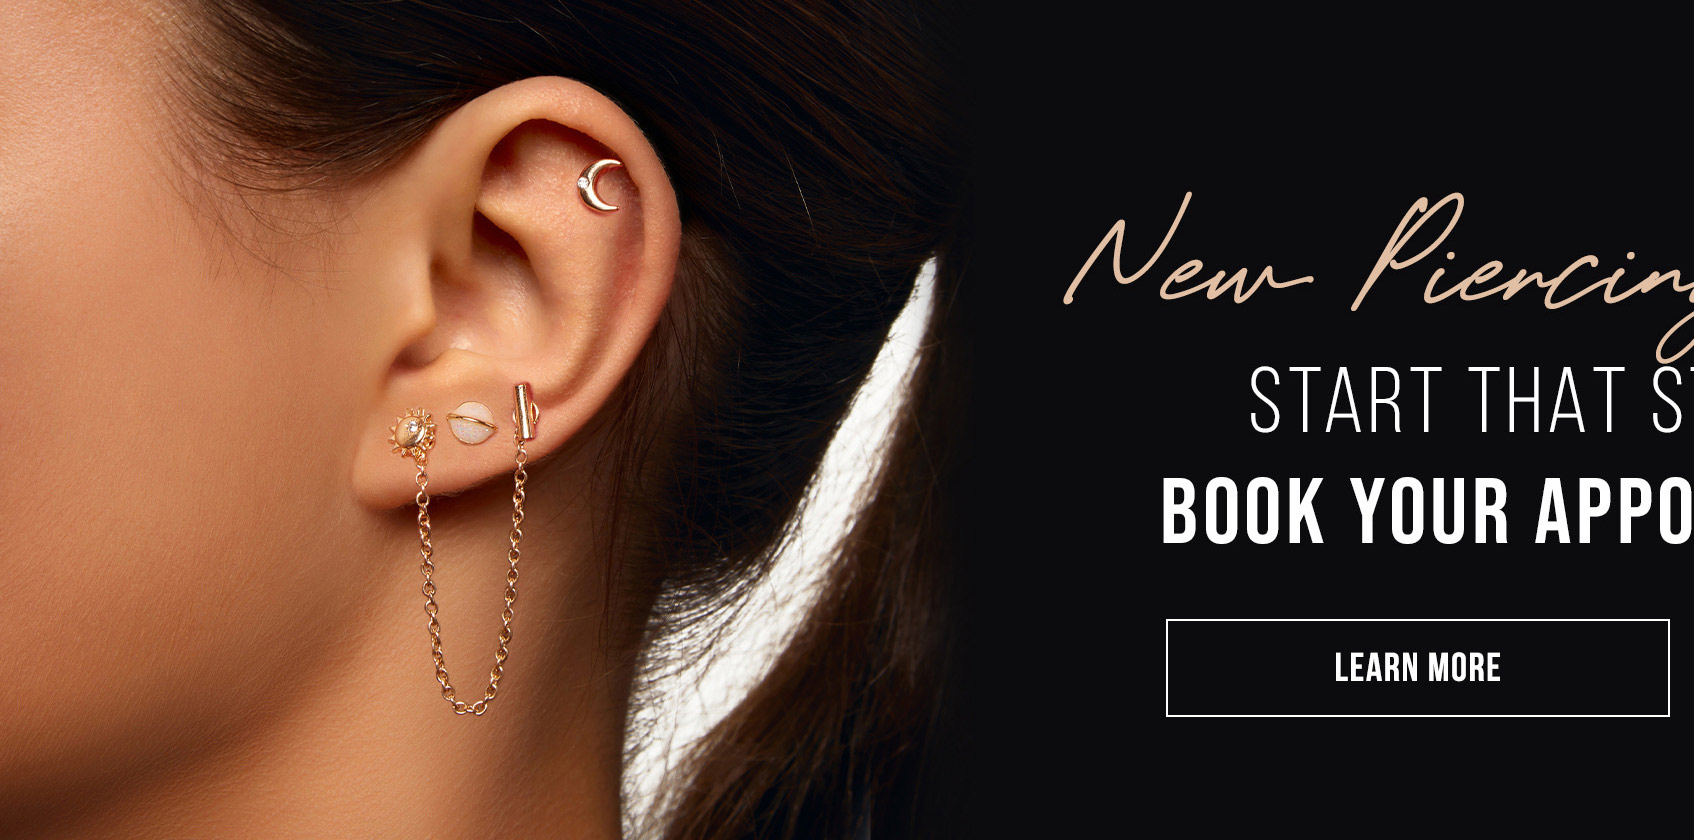 New Piercing, You Say? Learn More